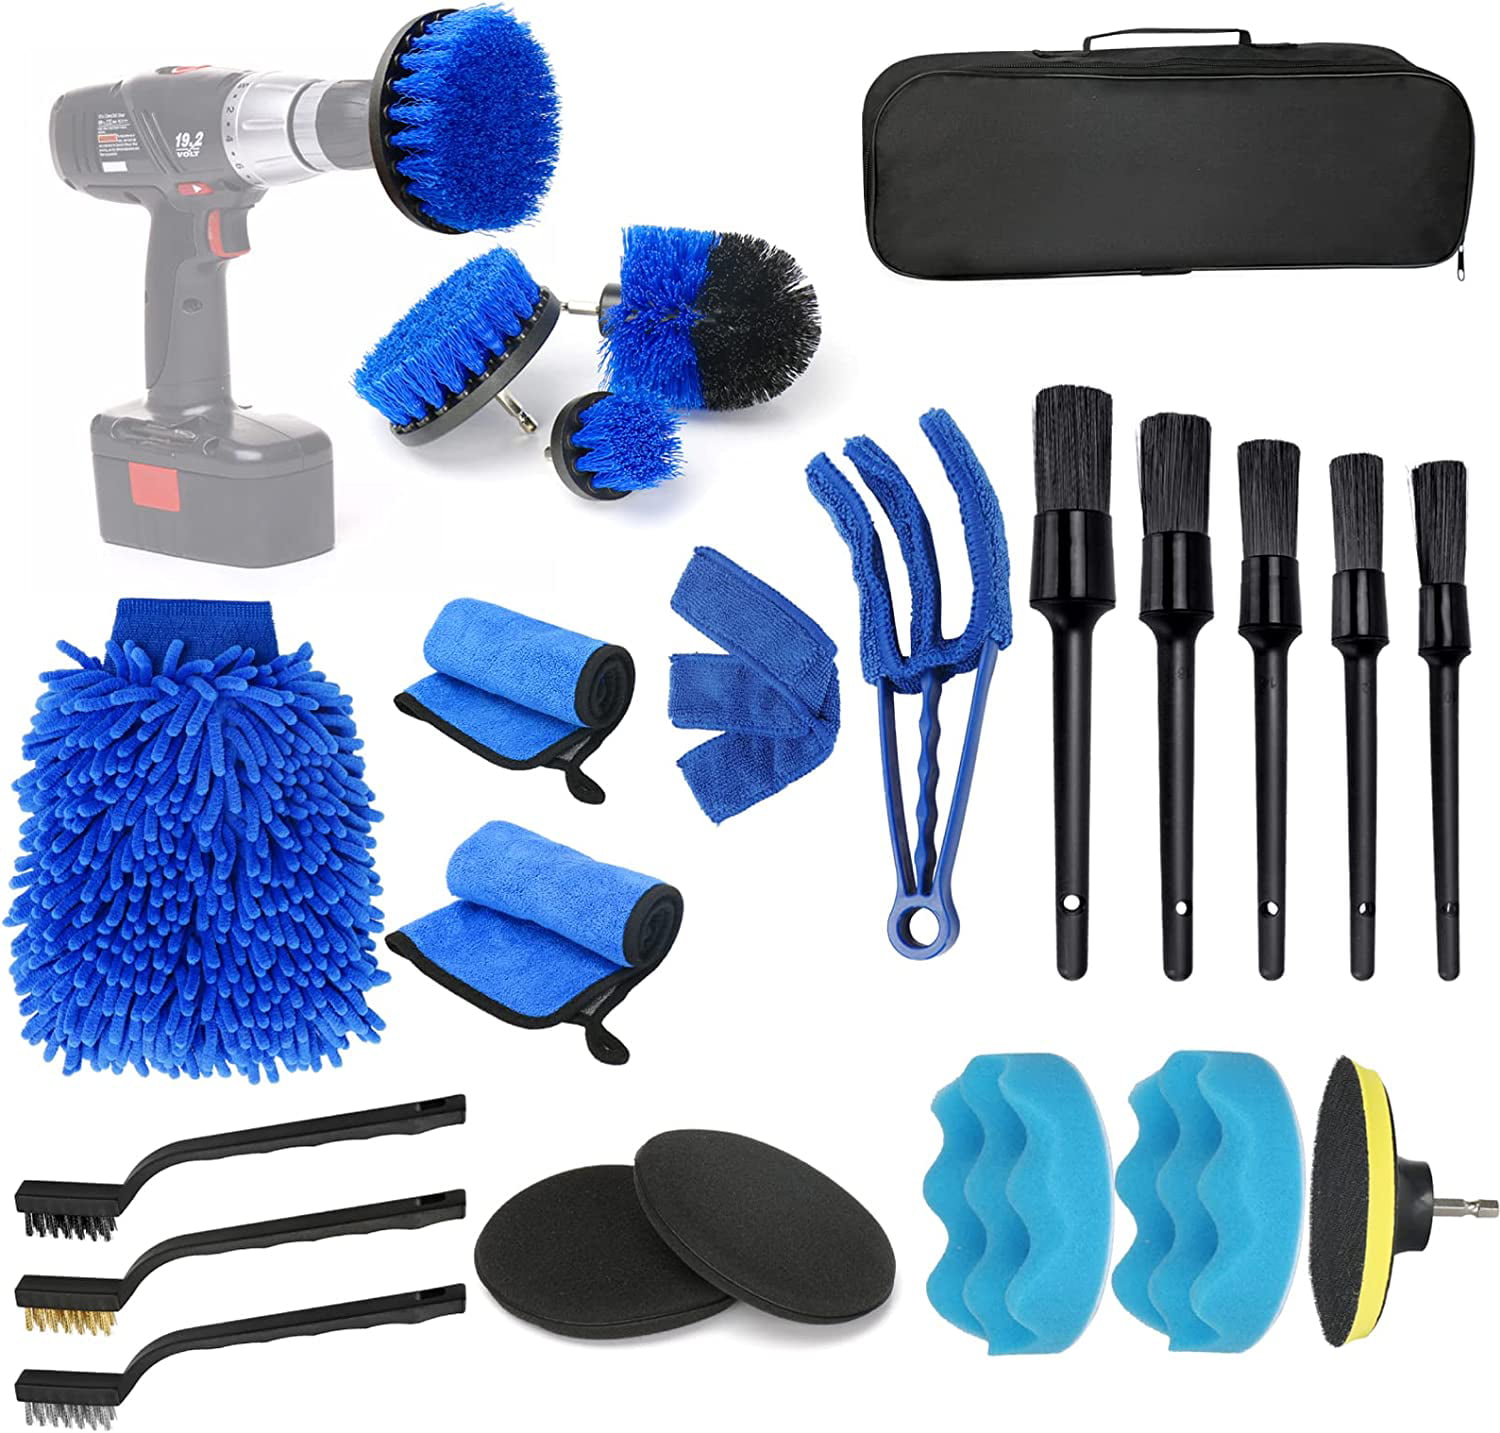 include Wire Brush Automotive Air Conditioner Cleaner Air Vent Leather Auto Detailing Brush for Cleaning Car Motorcycle Interior Exterior 18 Pieces Car Detailing Brush Set Car Cleaner Brush Kits 